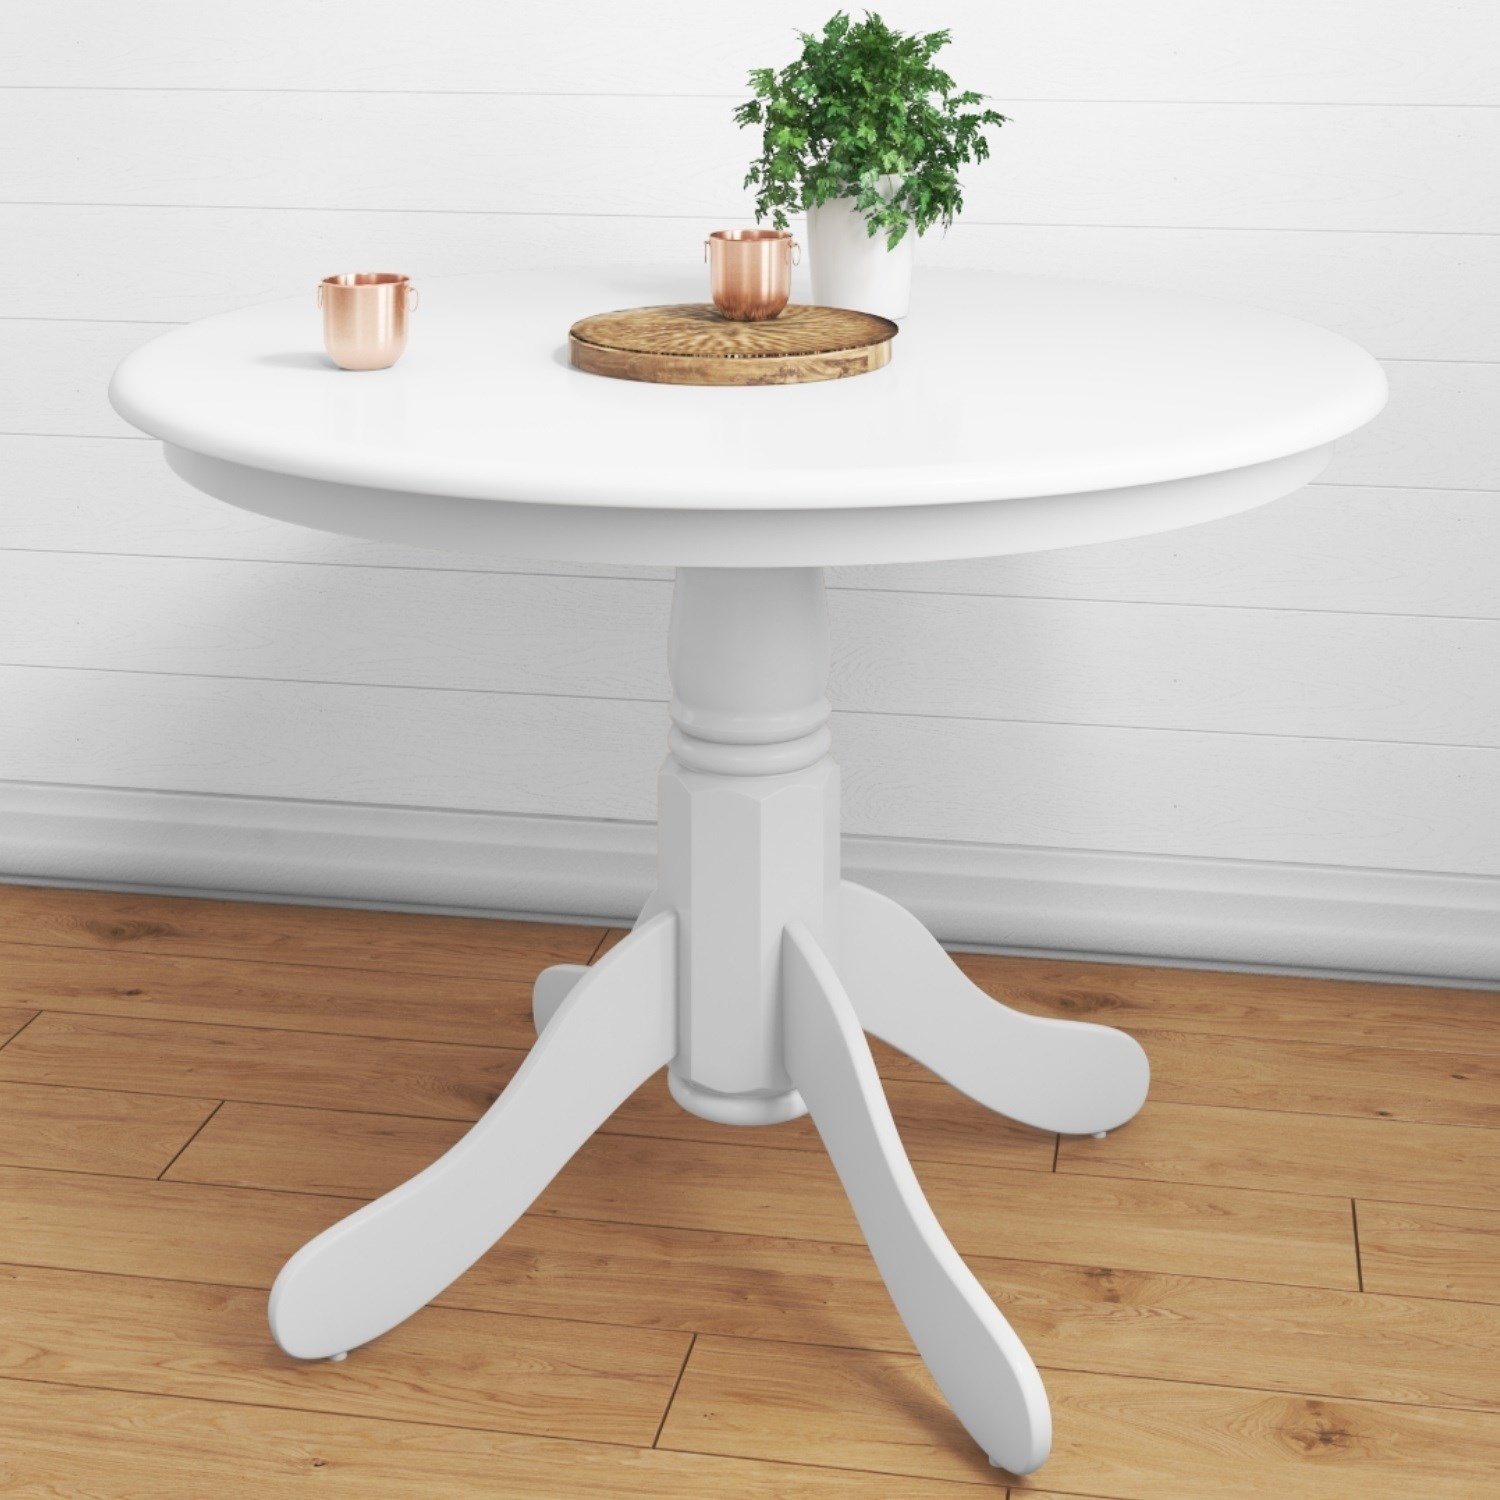 Small Round Dining Table In White With 4 Velvet Chairs In Pink Rhode Island Kaylee Furniture123